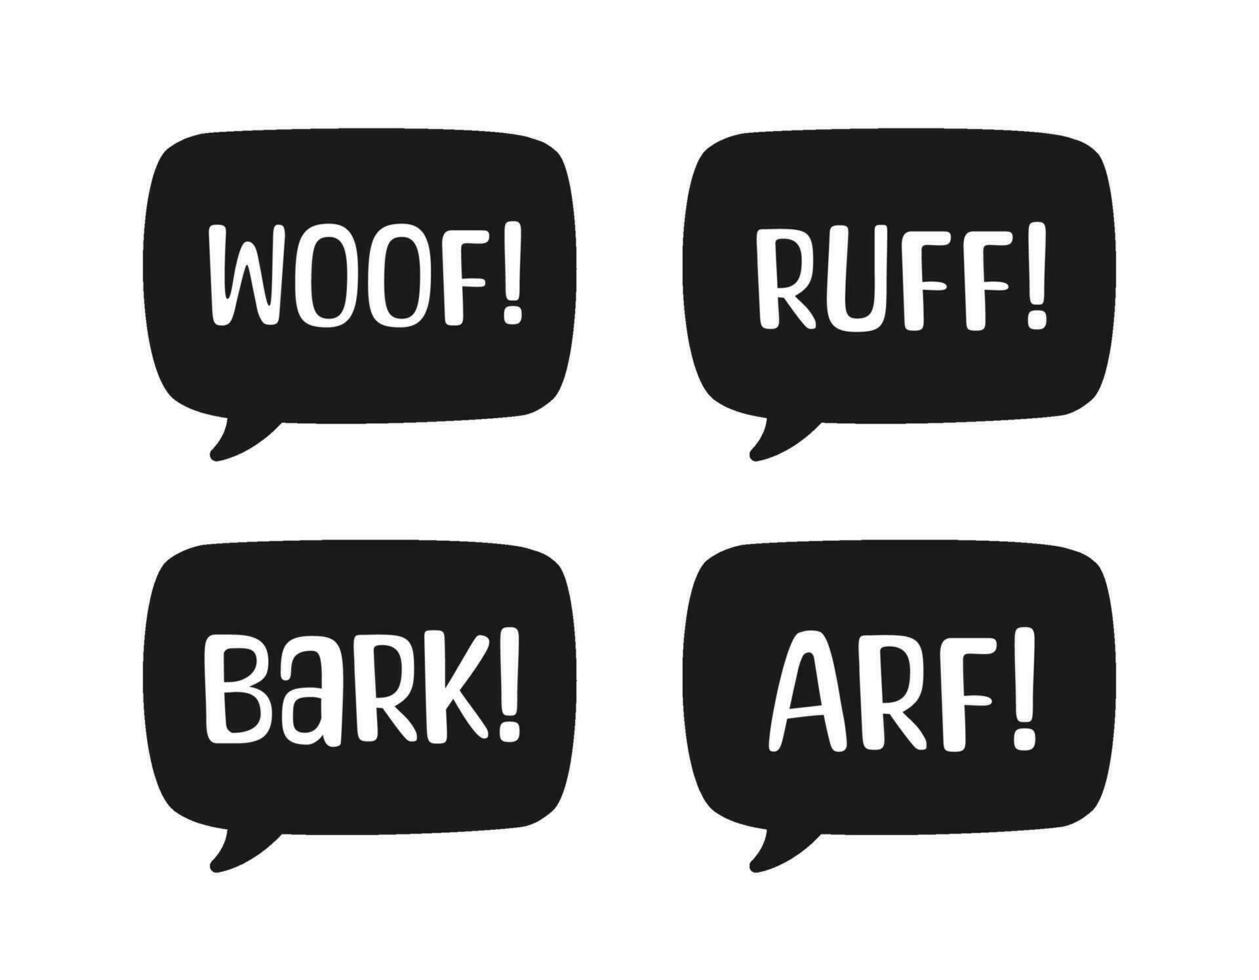 Dog bark animal sound effect text in a speech bubble balloon silhouette clipart set. Cute cartoon onomatopoeia comics and lettering. vector